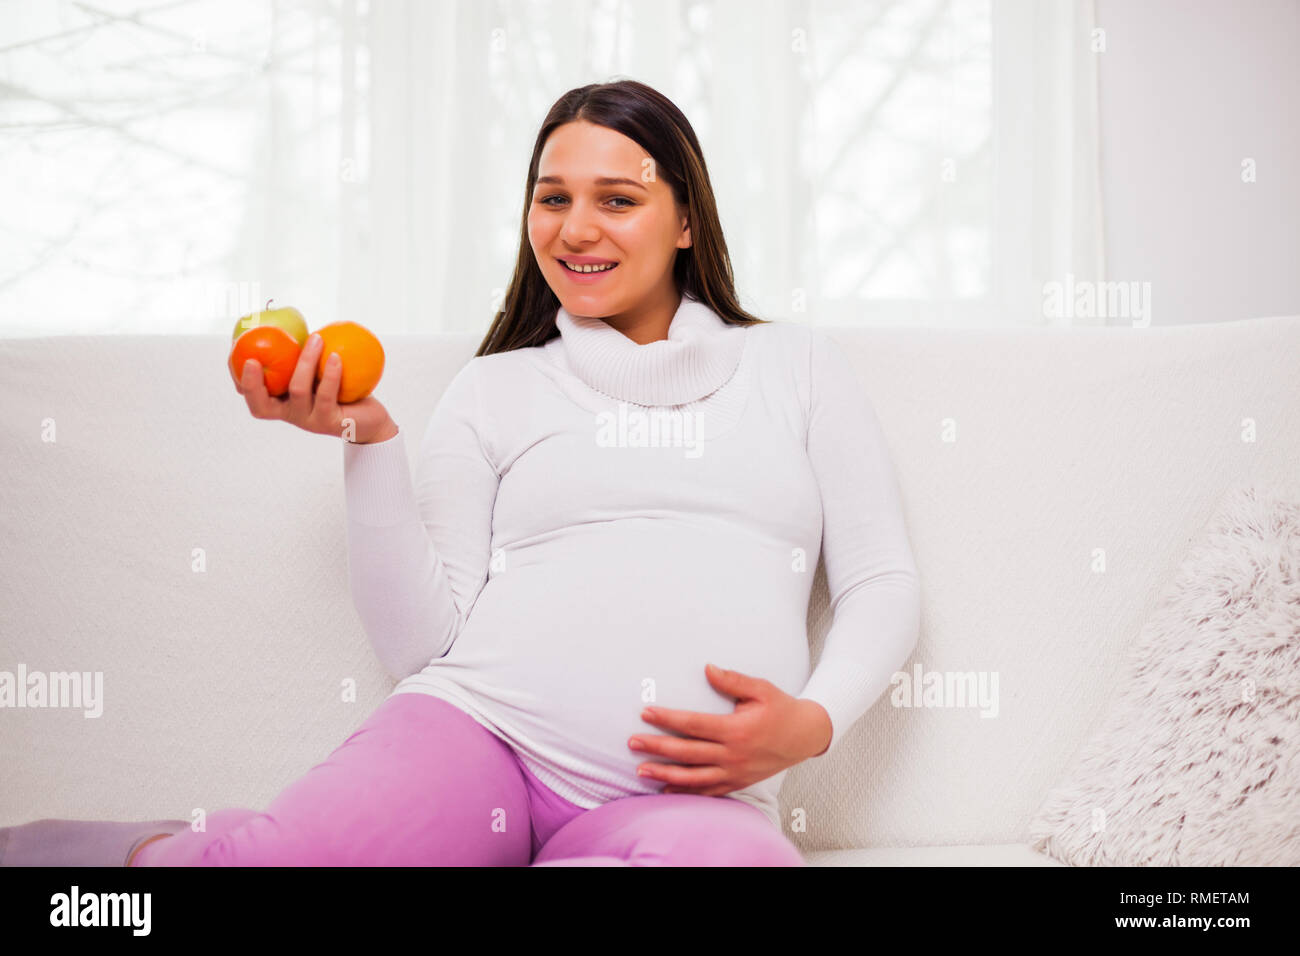 Pregnant woman is holding fresh fruit. Healthy eating. Stock Photo